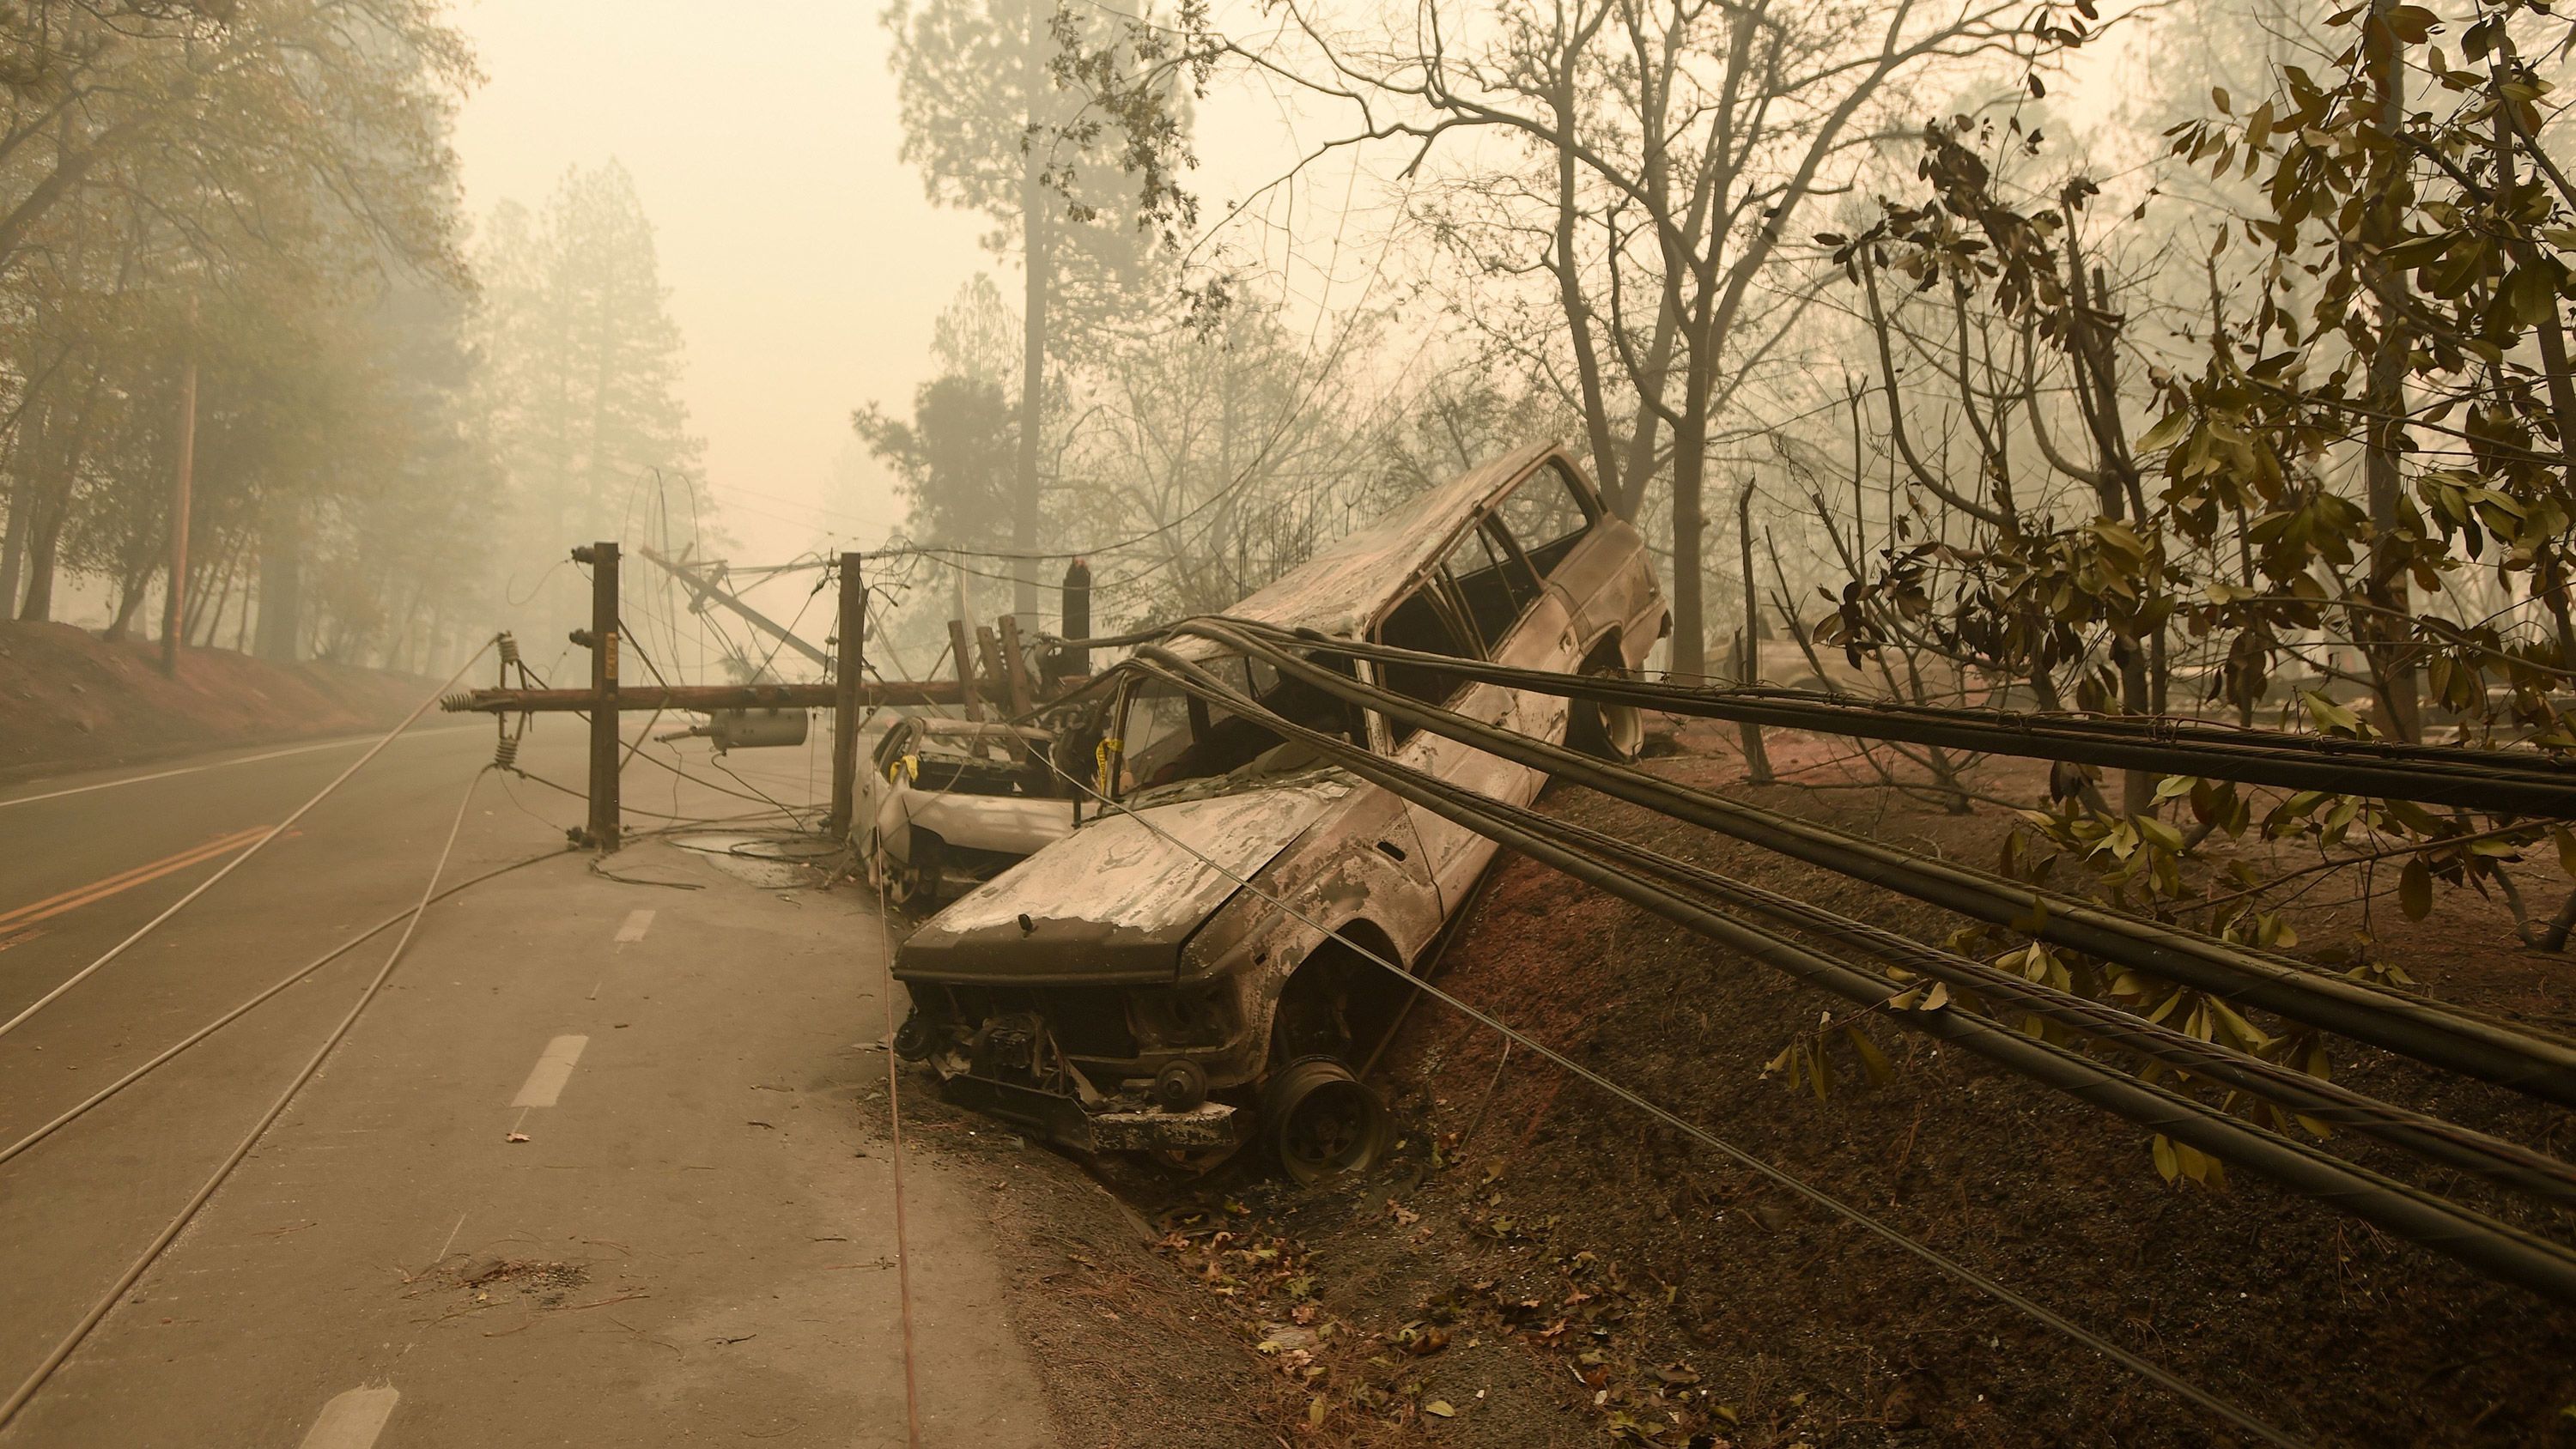 PG&E, utility tied to wildfires, will file for bankruptcy | CNN Business